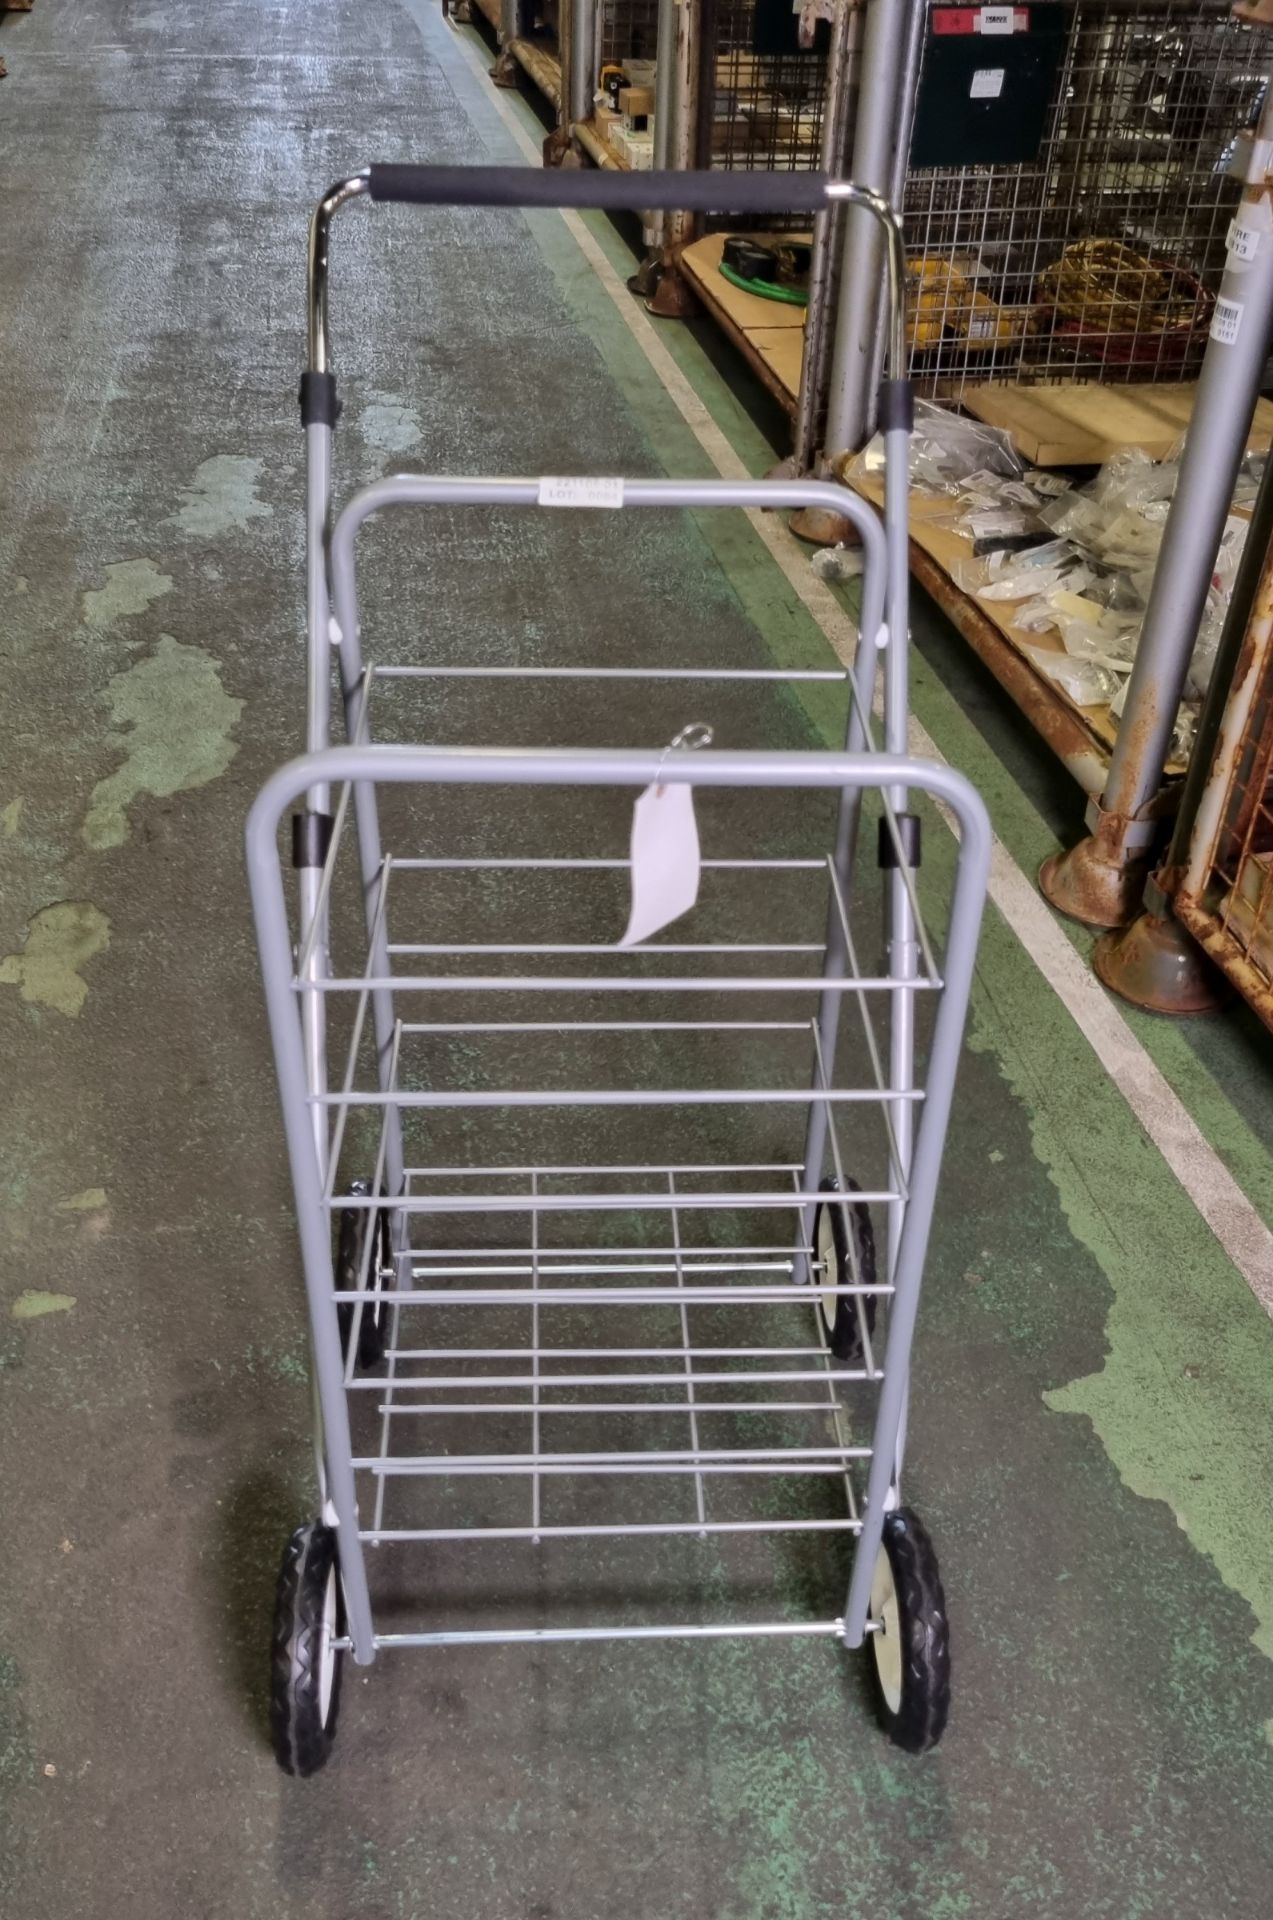 Metal folding small shopping trolley frame, silver - L44xW54xH92cm - Image 3 of 3